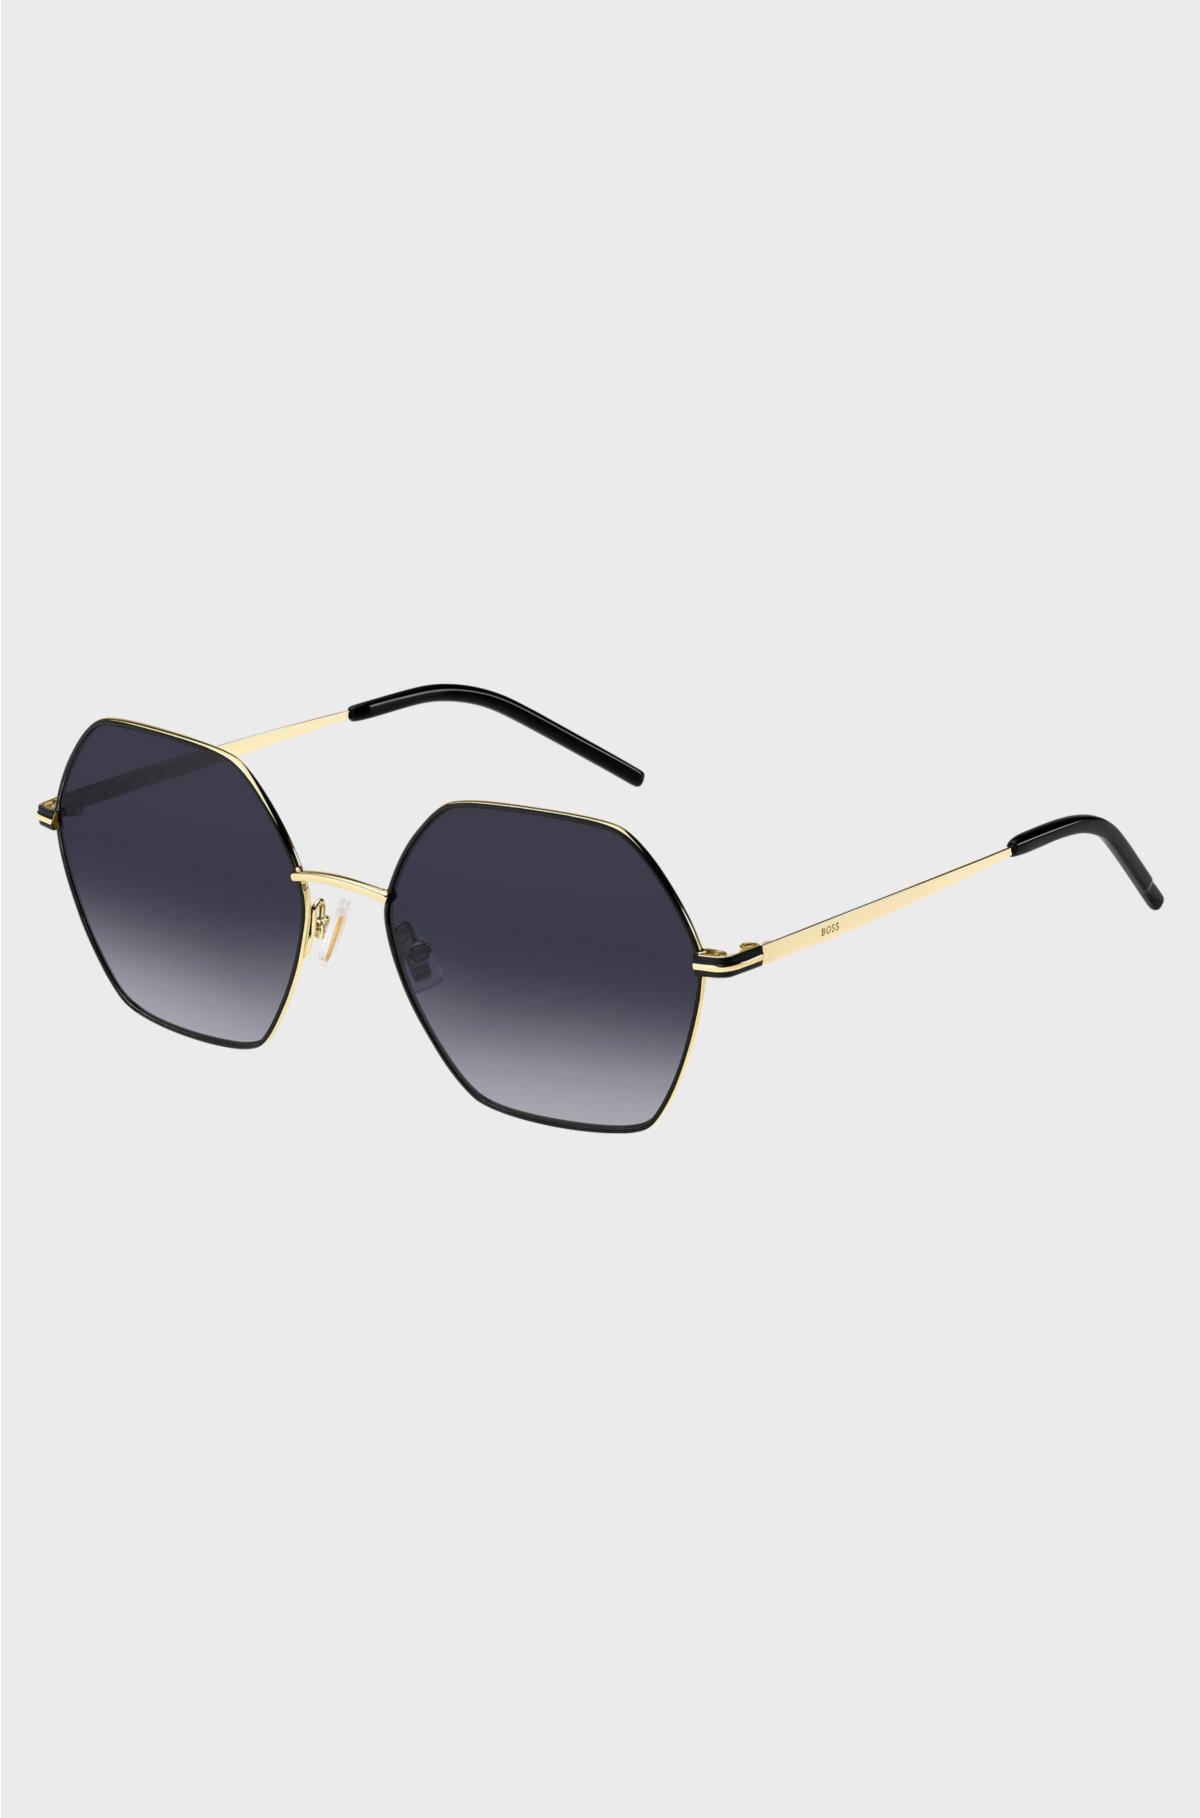 Angular sunglasses in black and gold-tone steel, Gold